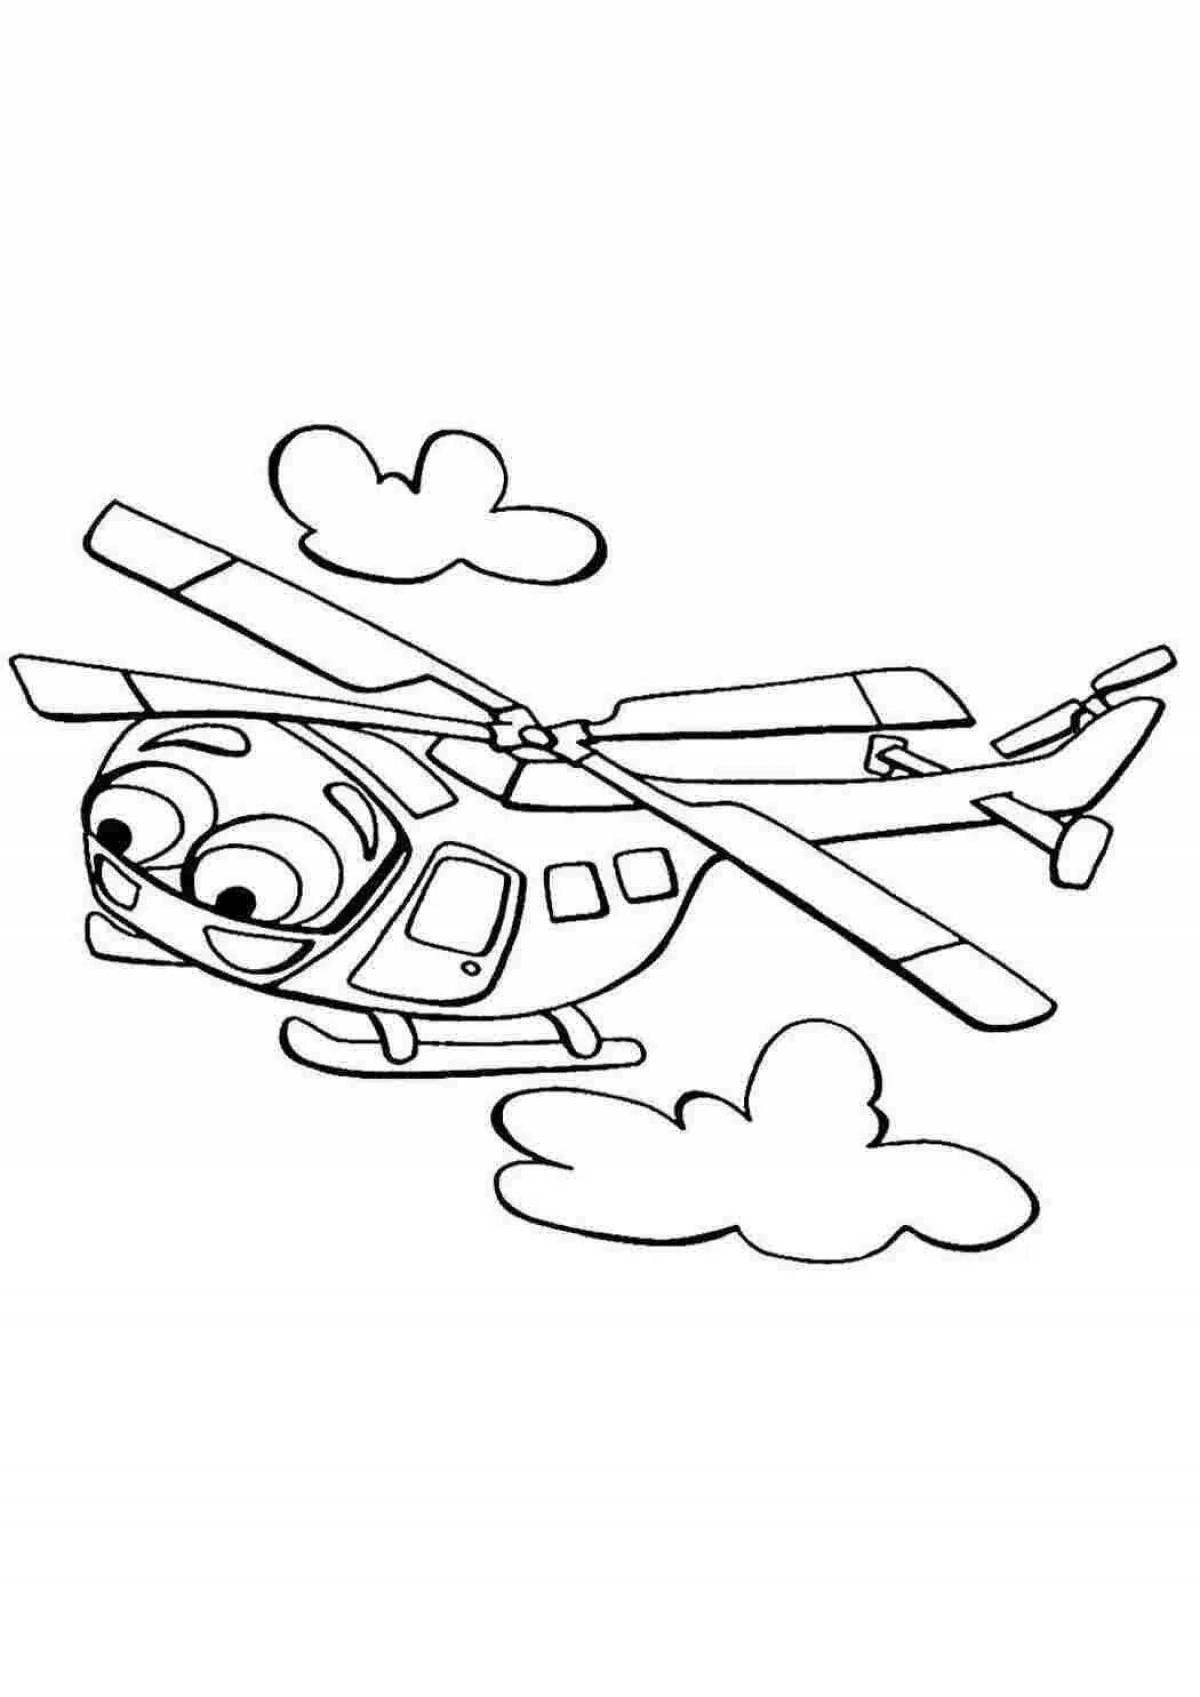 Funny helicopter coloring book for kids